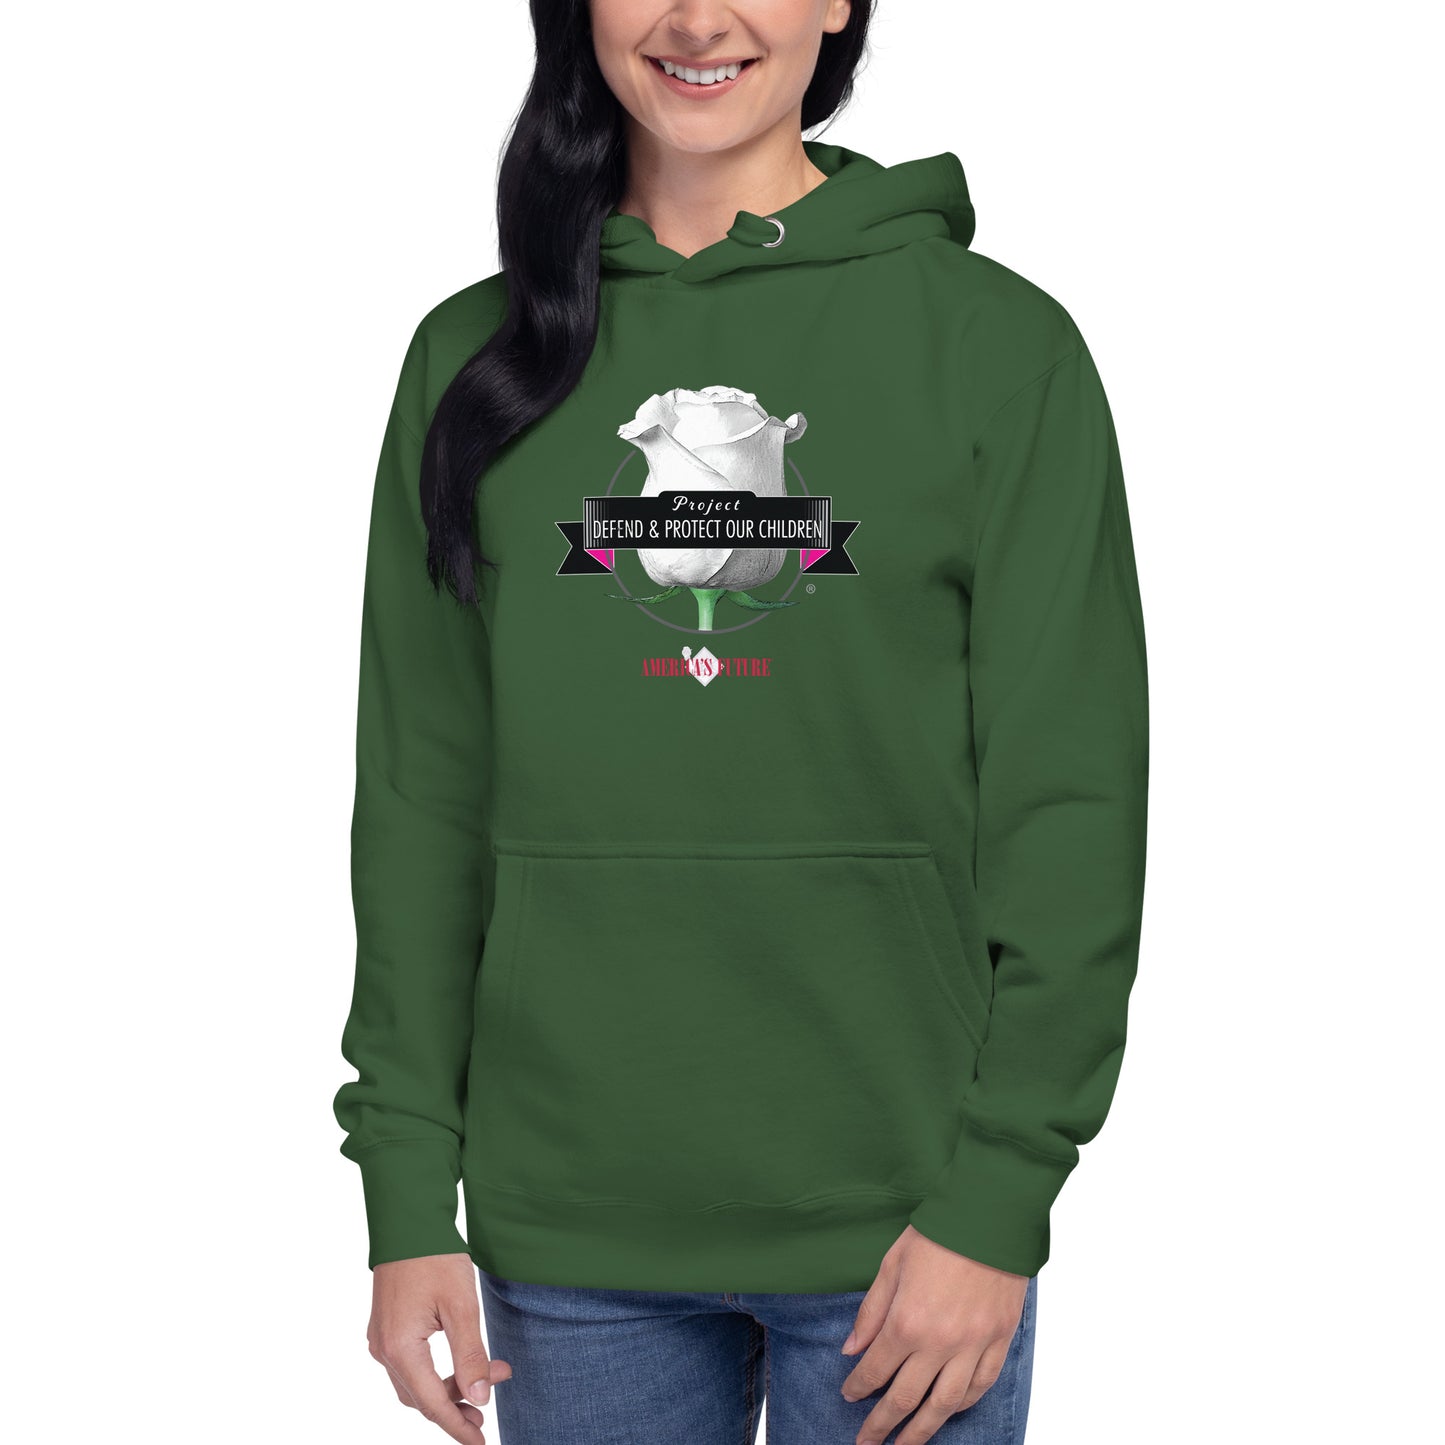 Project Defend & Protect Our Children - Unisex Hoodie